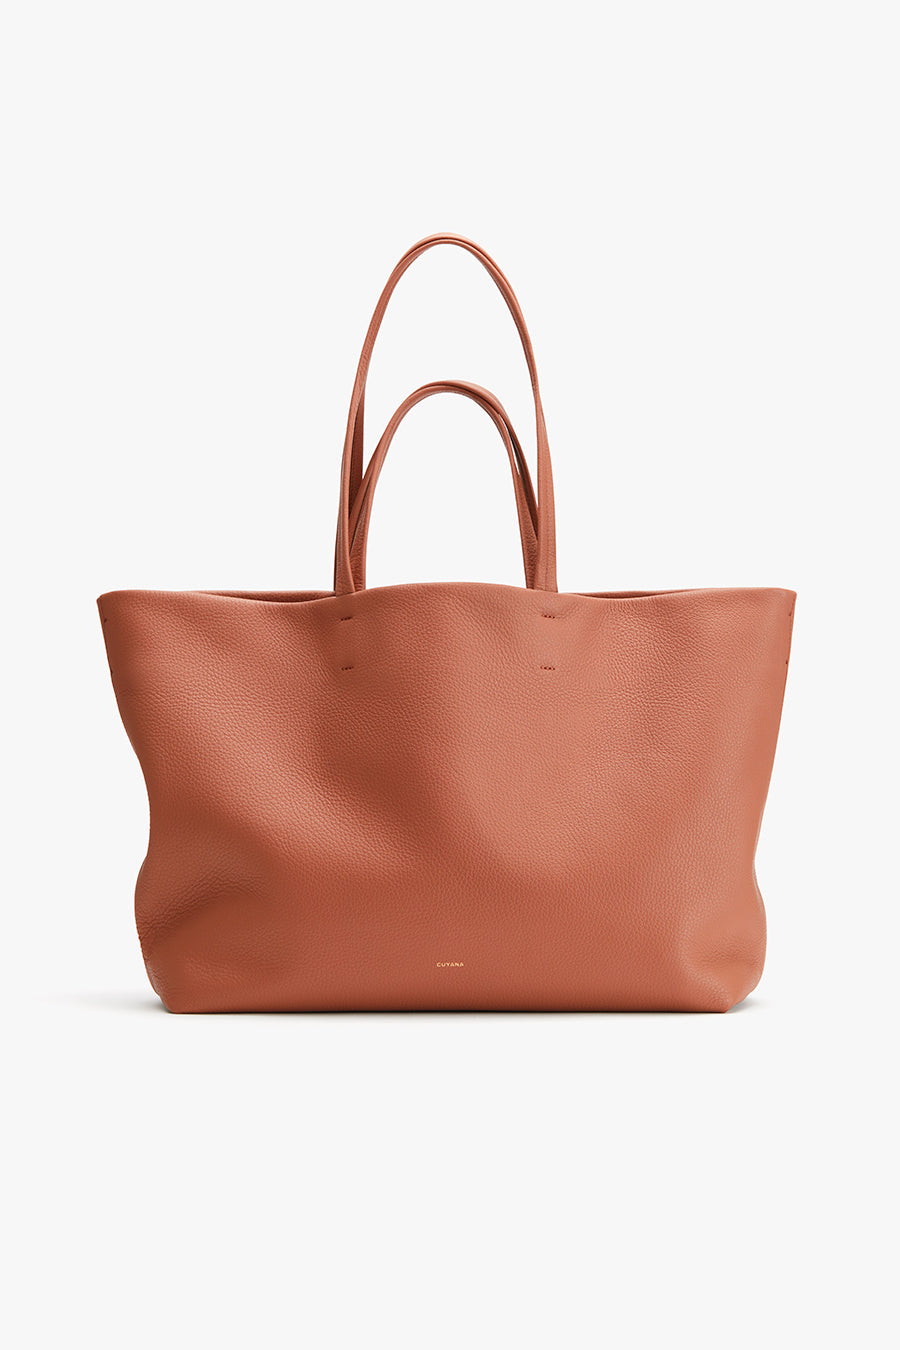 Cuyana's Best-Selling Bag Now Comes in a Teeny, Tiny Version